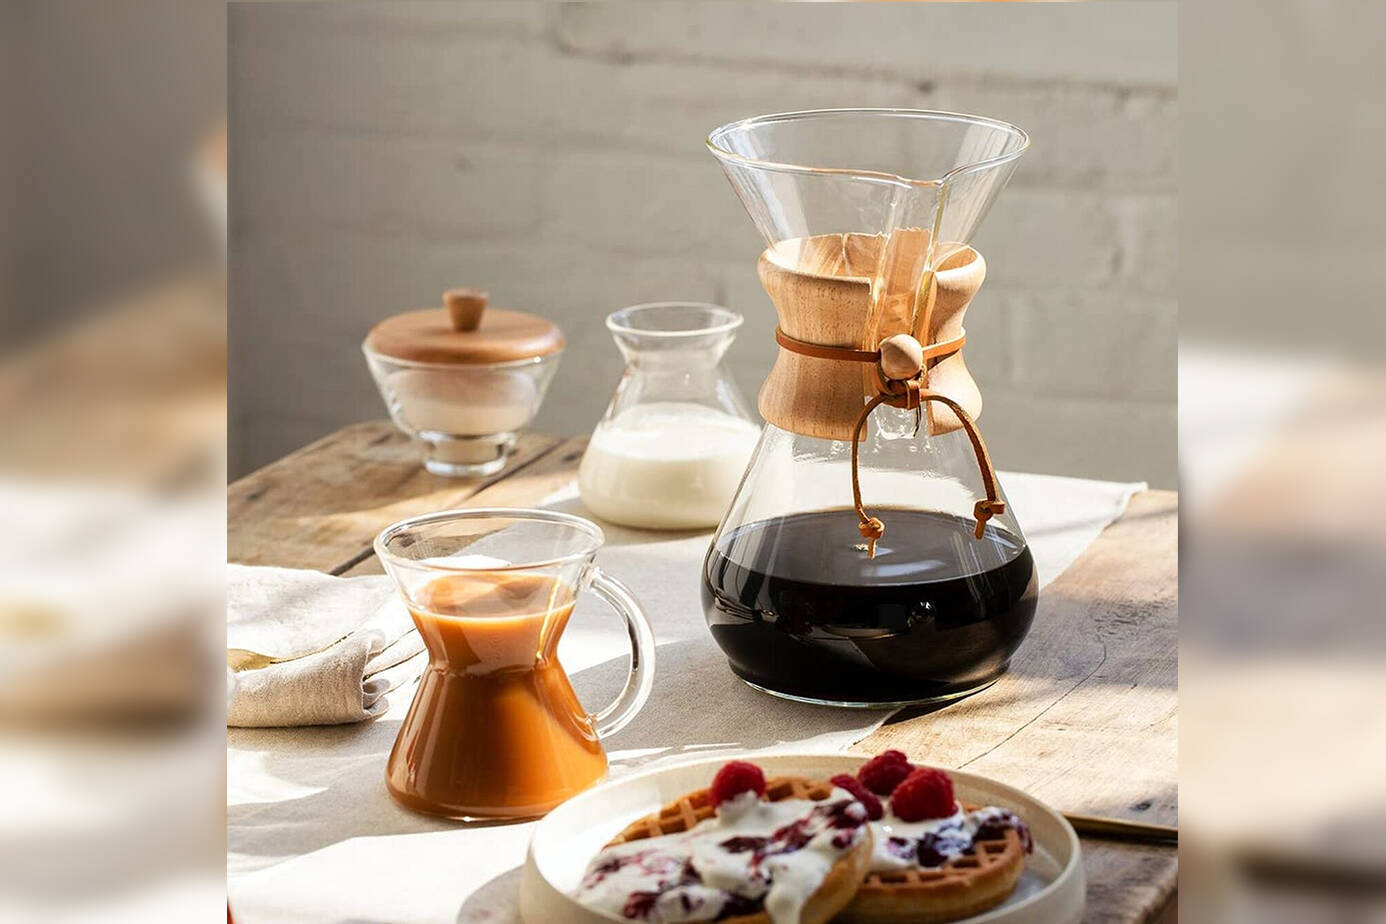 Are you a thoughtful artist with a Chemex, or a convenience queen with a single-serve coffee maker? Find out what your coffee brewing style says about your personality. Photo: Amazon